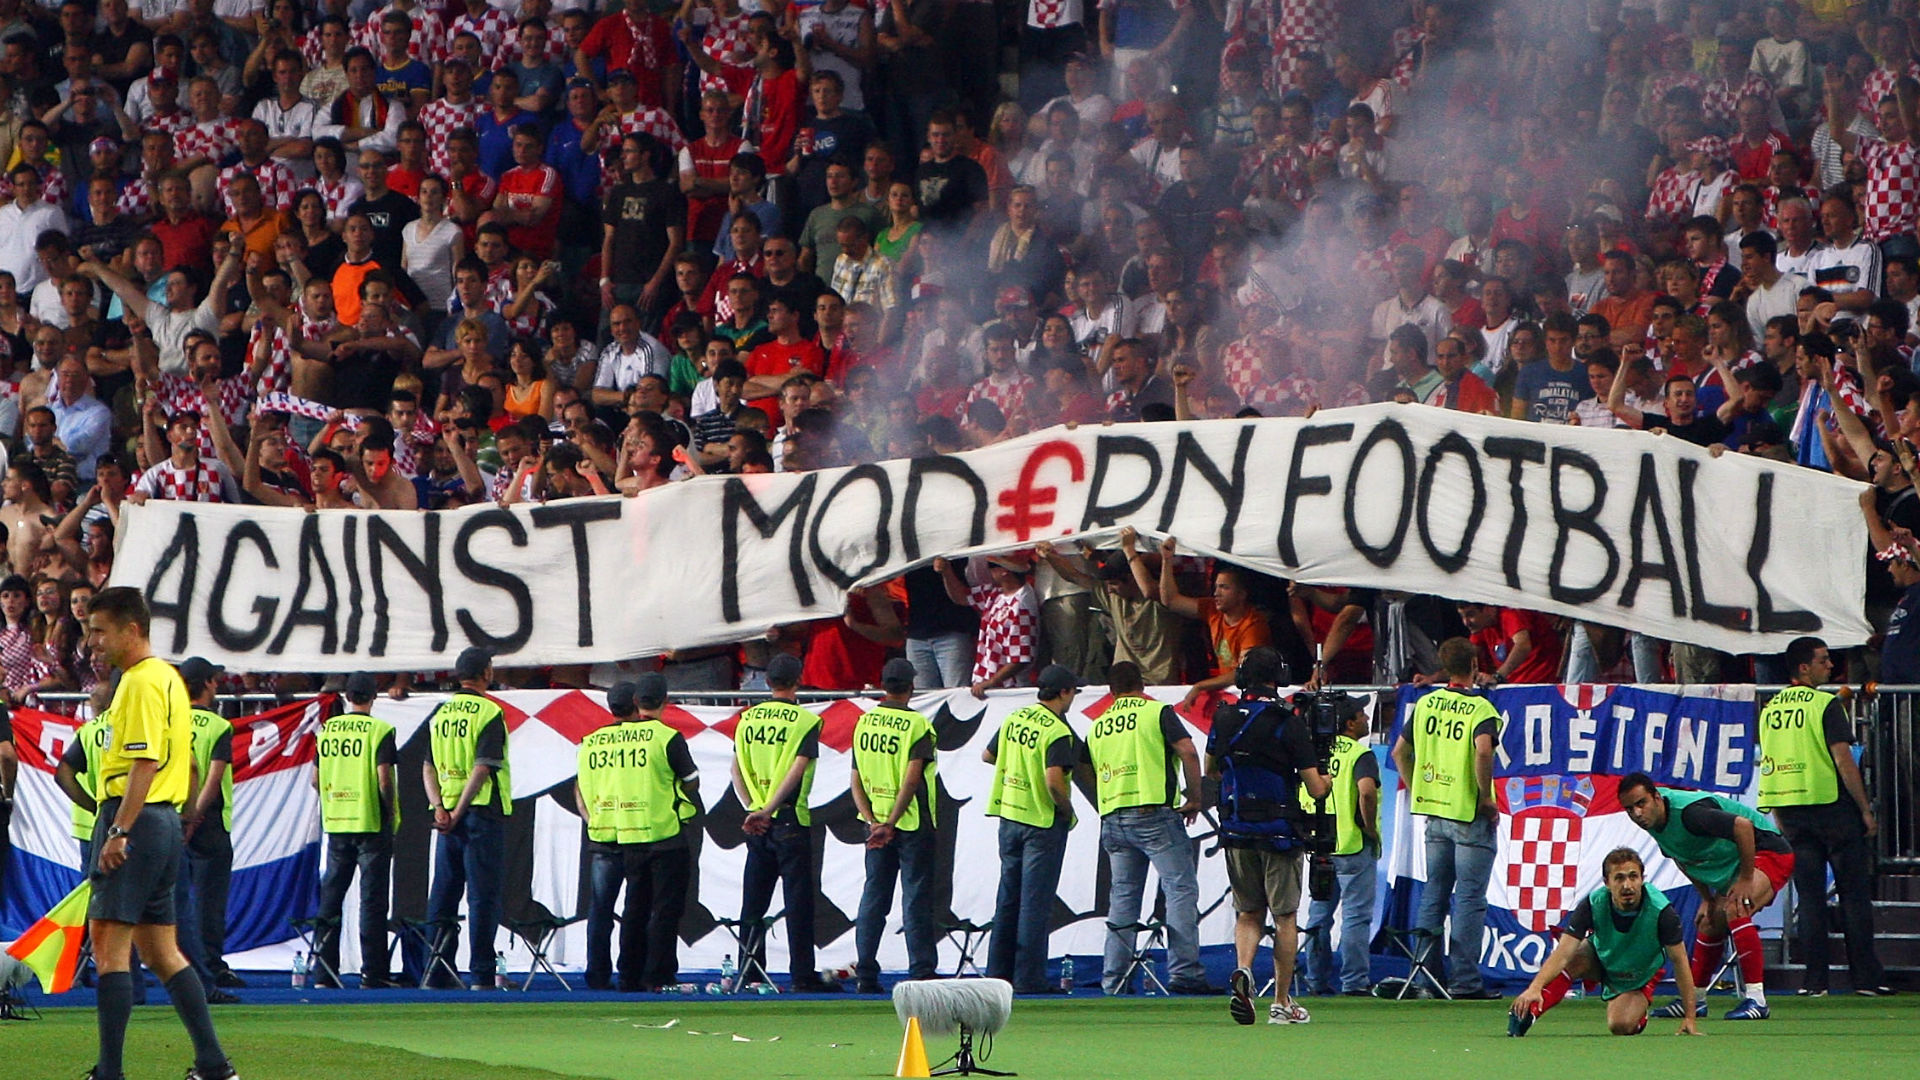 Against modern football: What is the grassroots campaign? | Goal.com